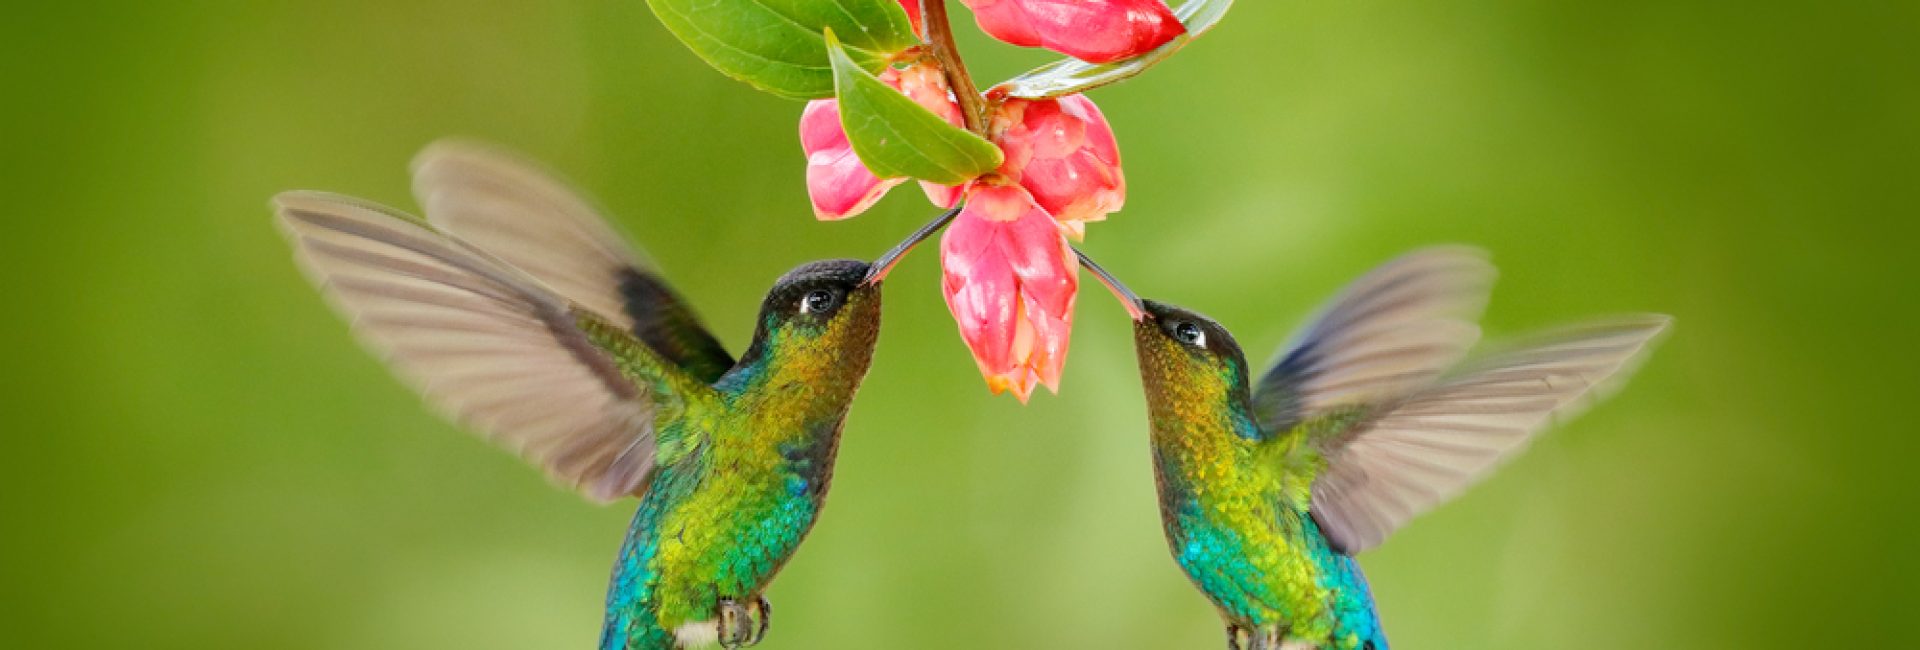 Two,Hummingbirds,With,Pink,Flower.,Fiery-throated,Hummingbirds,,Flying,Next,To